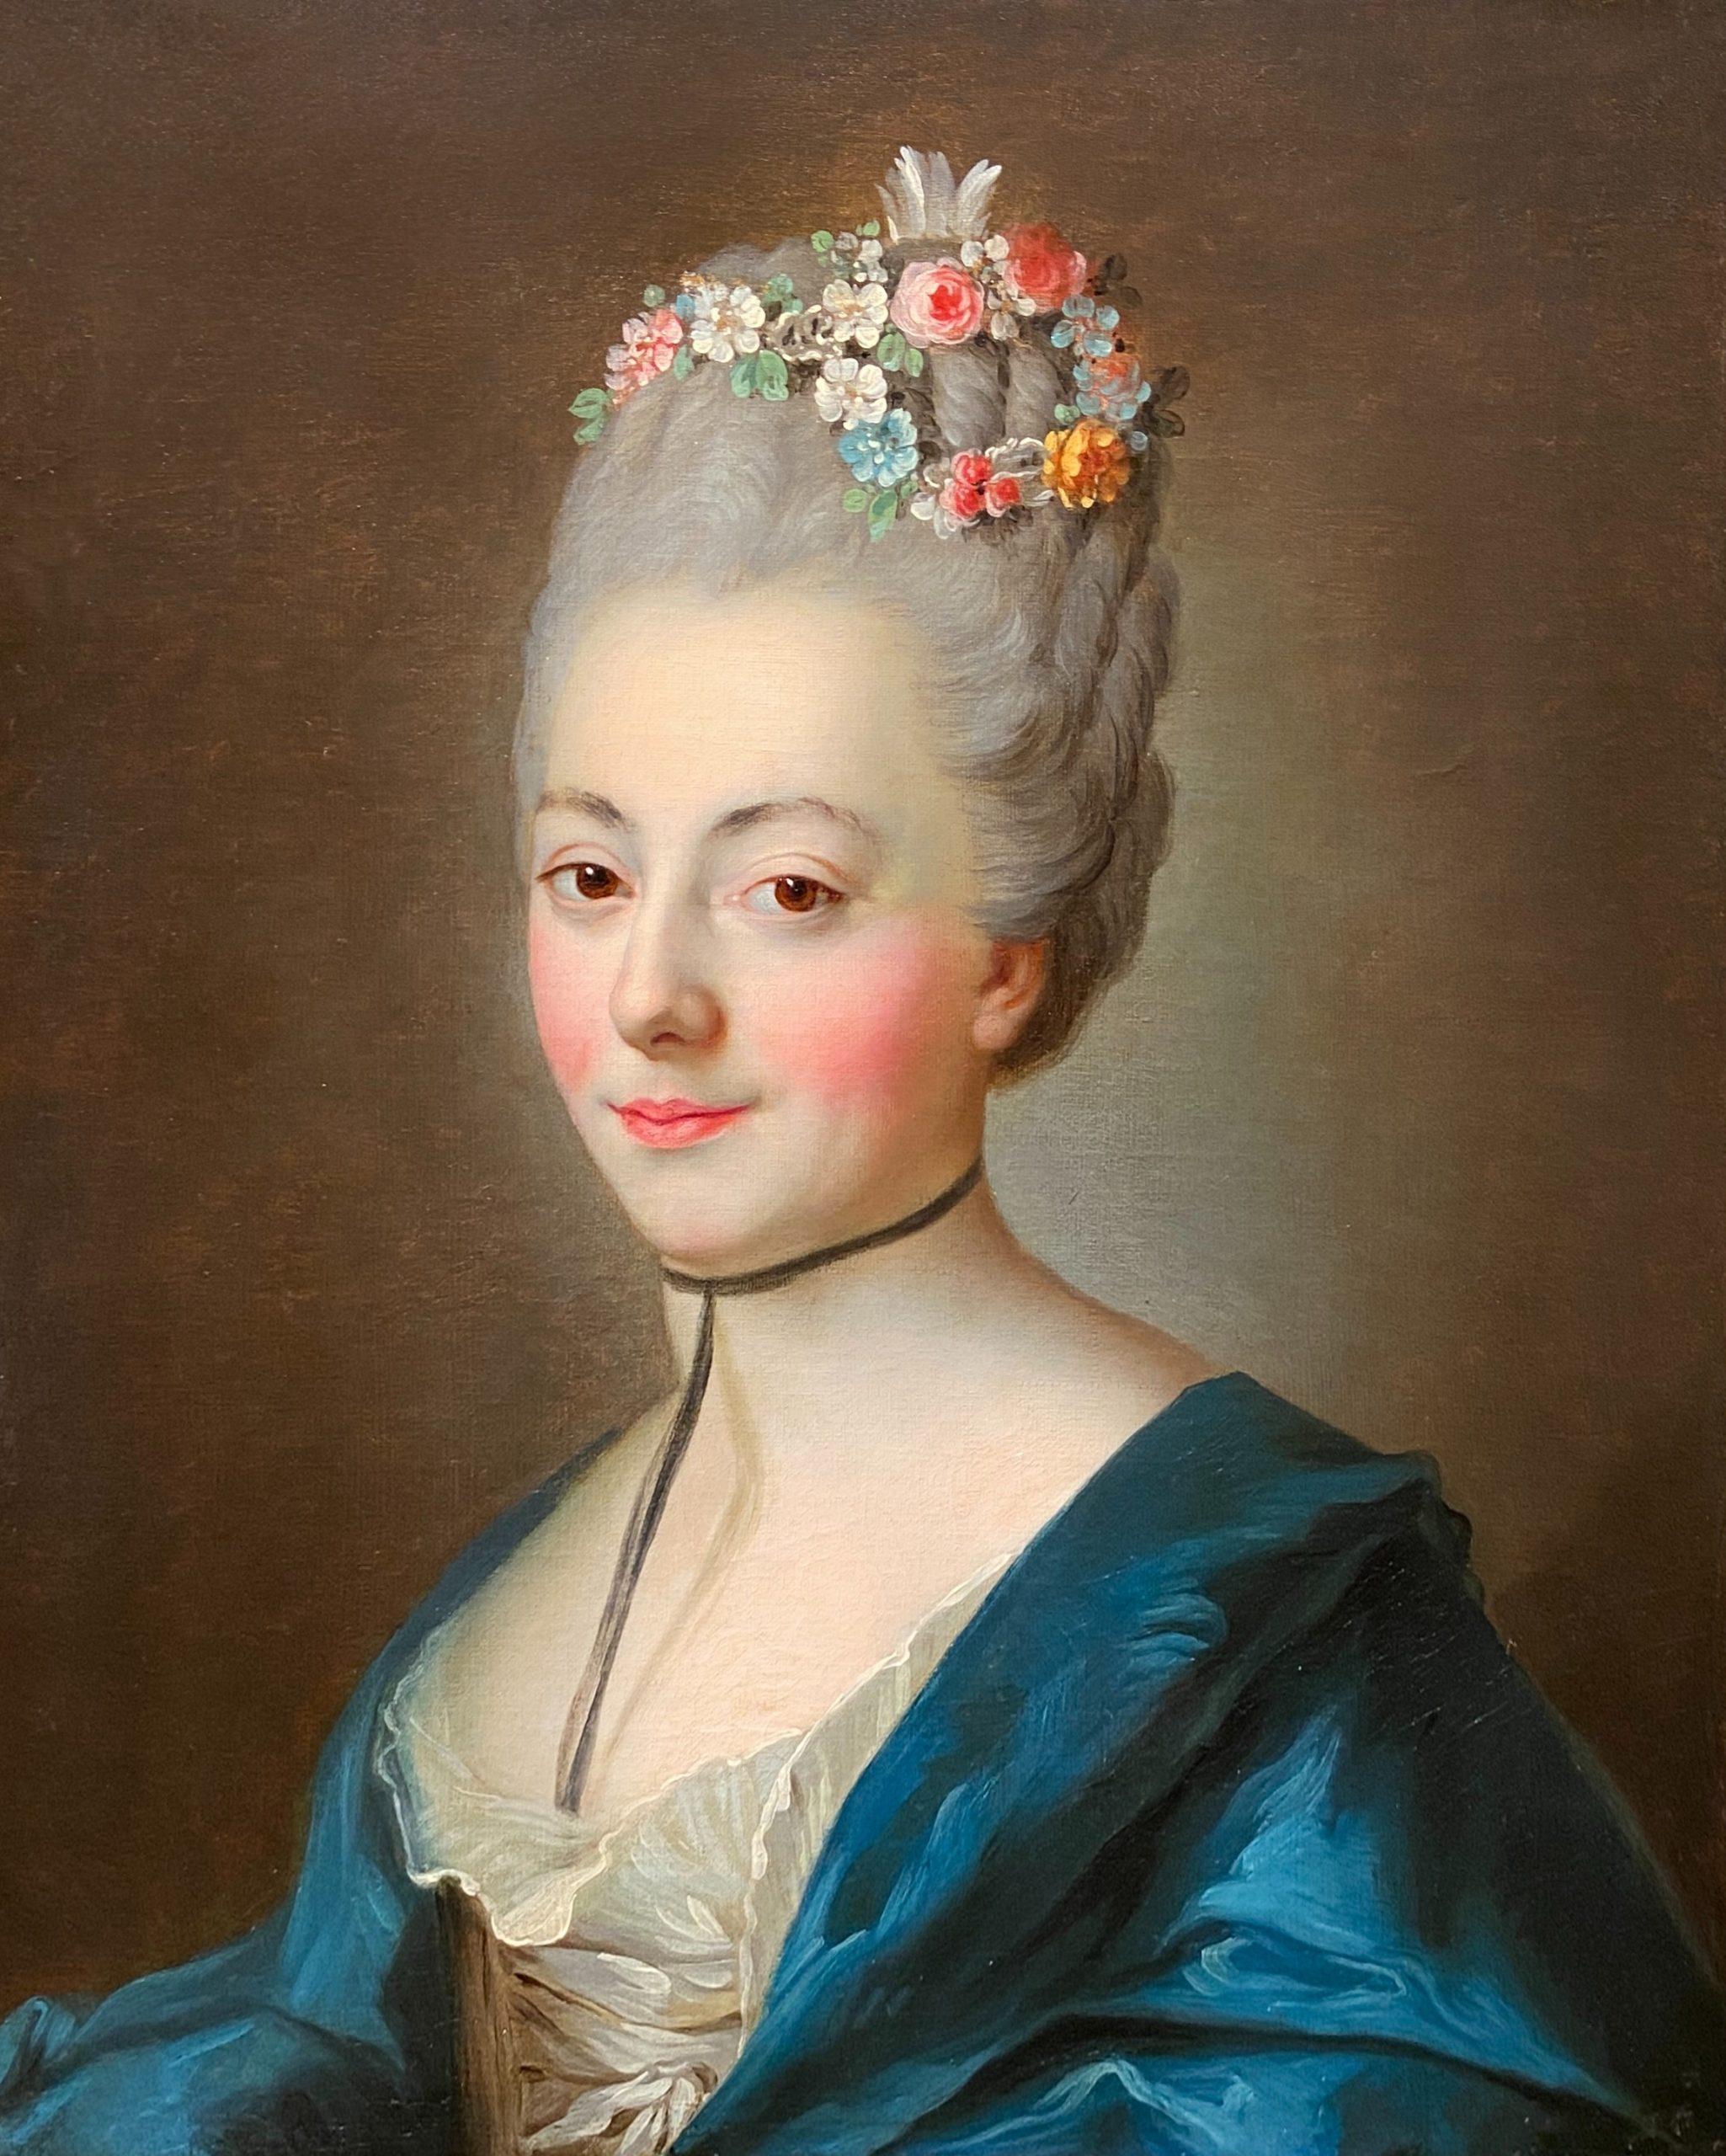 Portrait of a Lady with her Hair Adorned with Flowers, 18th Century French